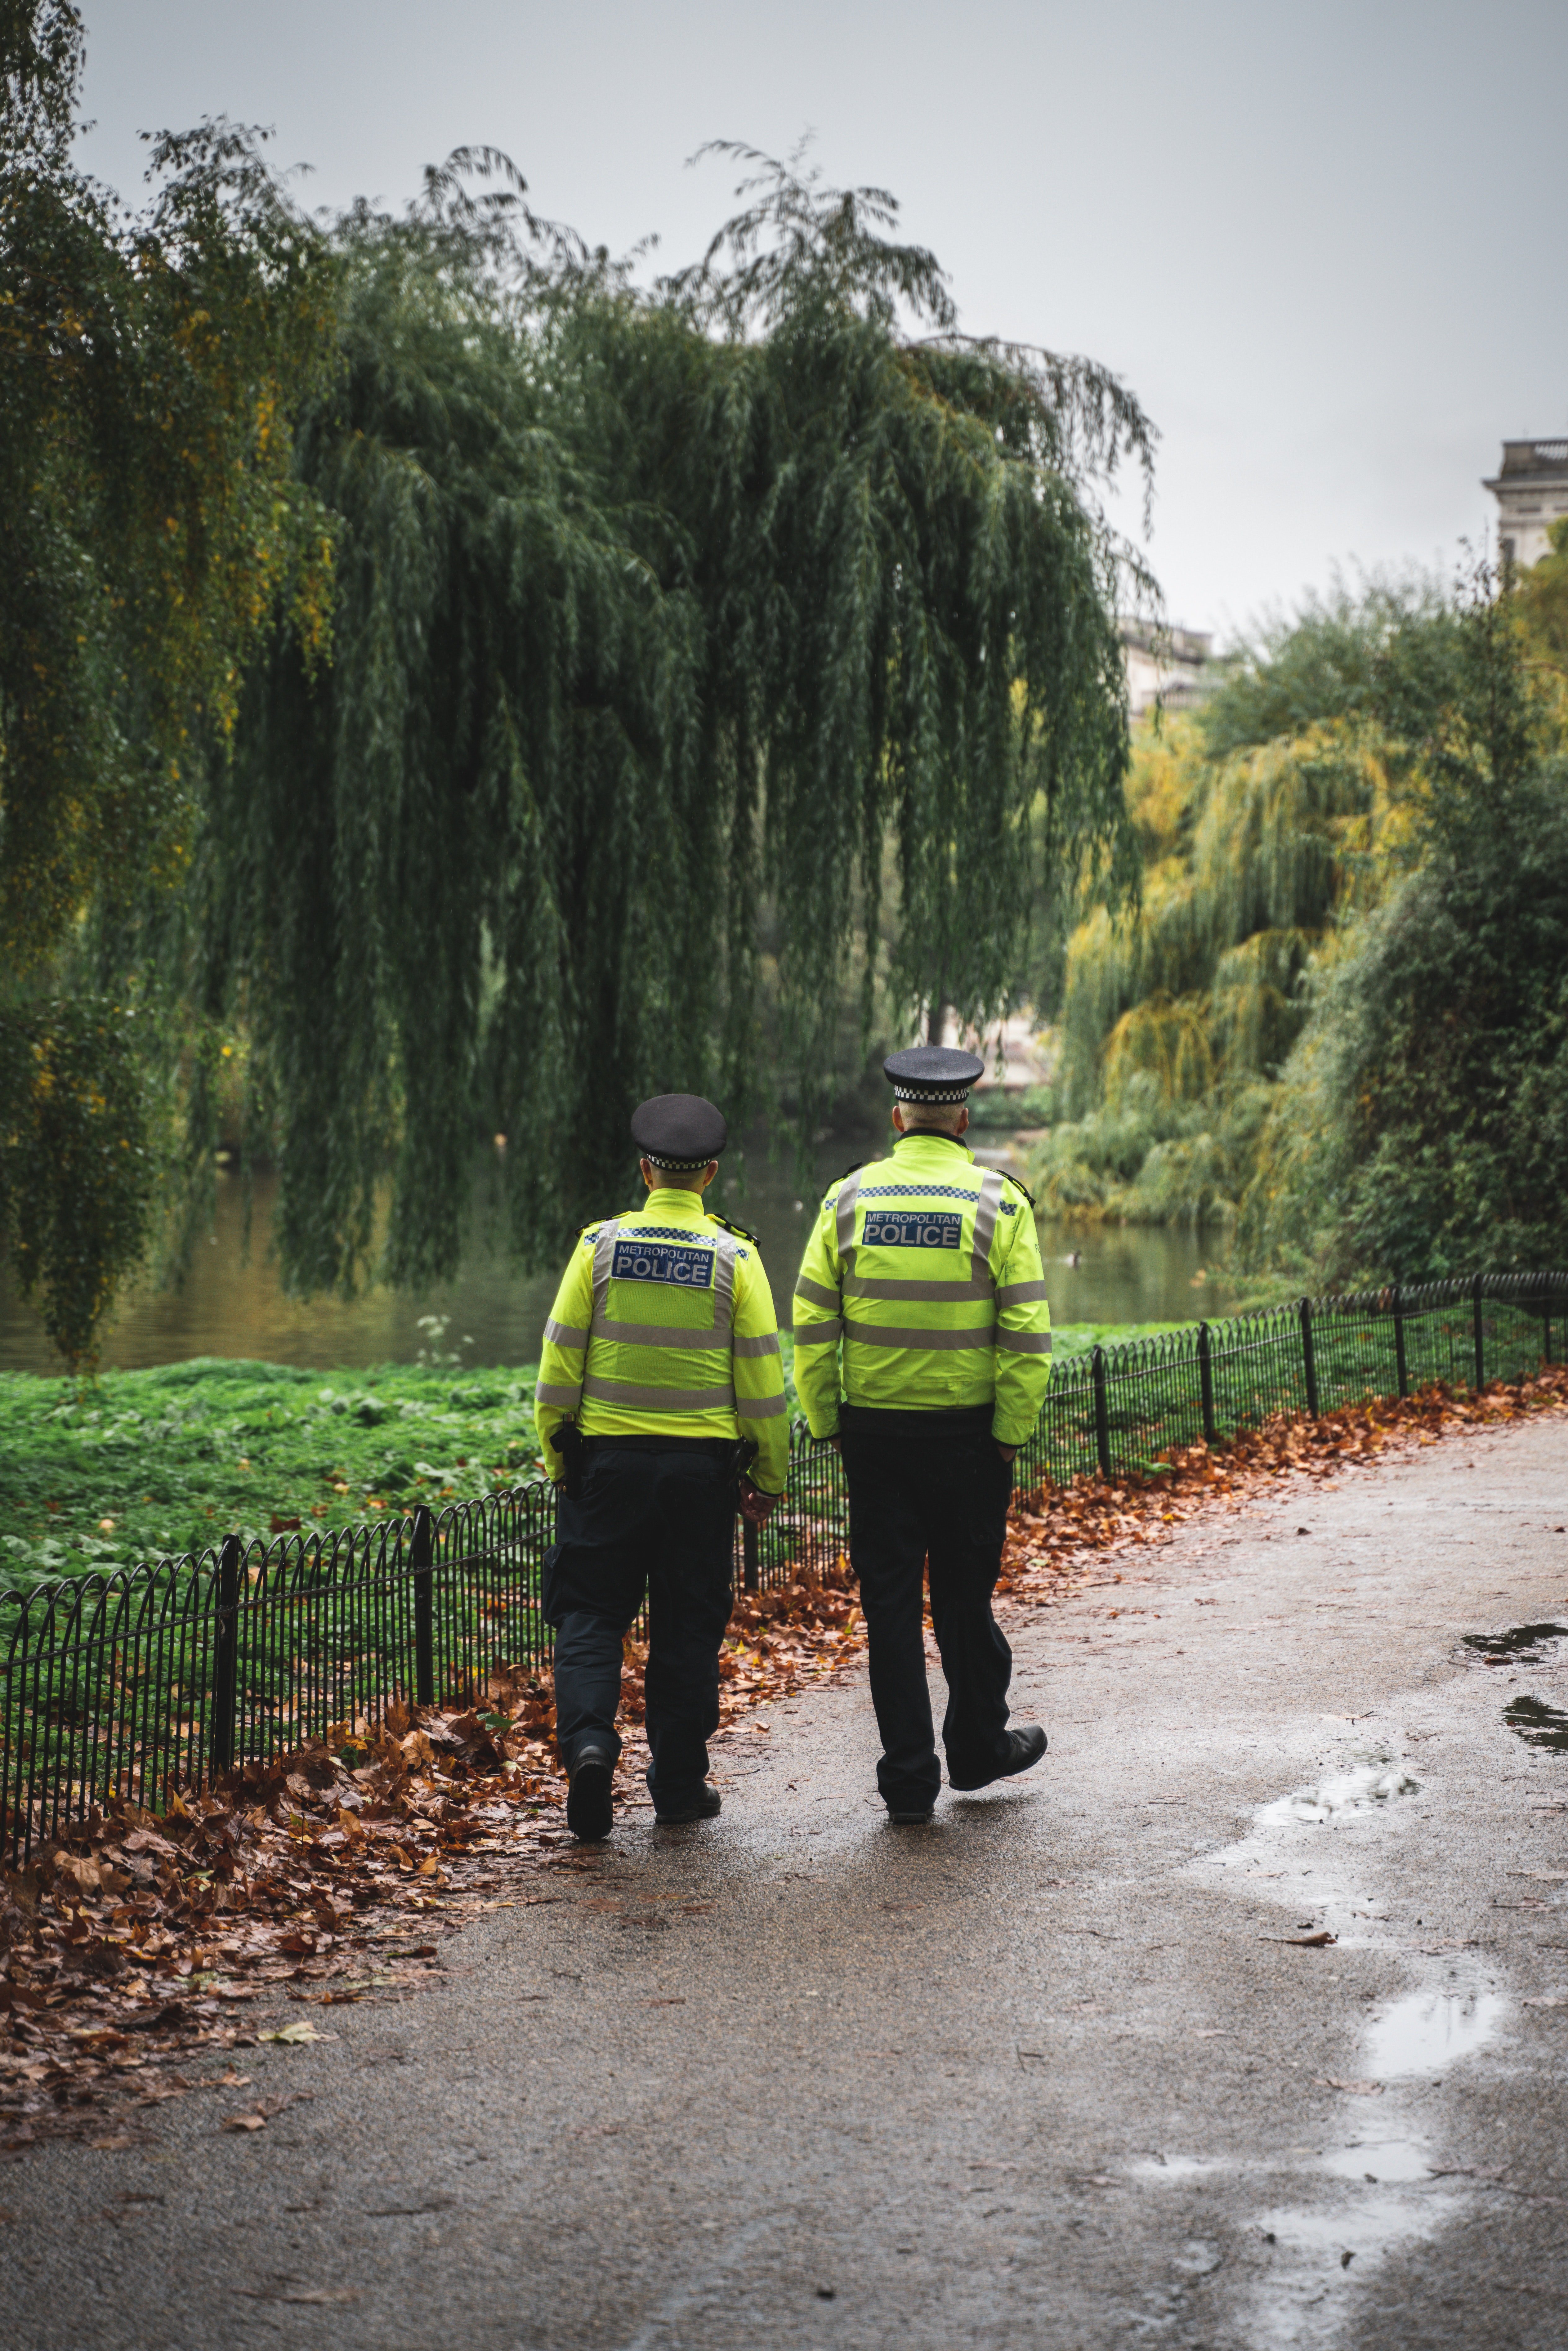 Two police officers walking along a park | Photo: Pexels